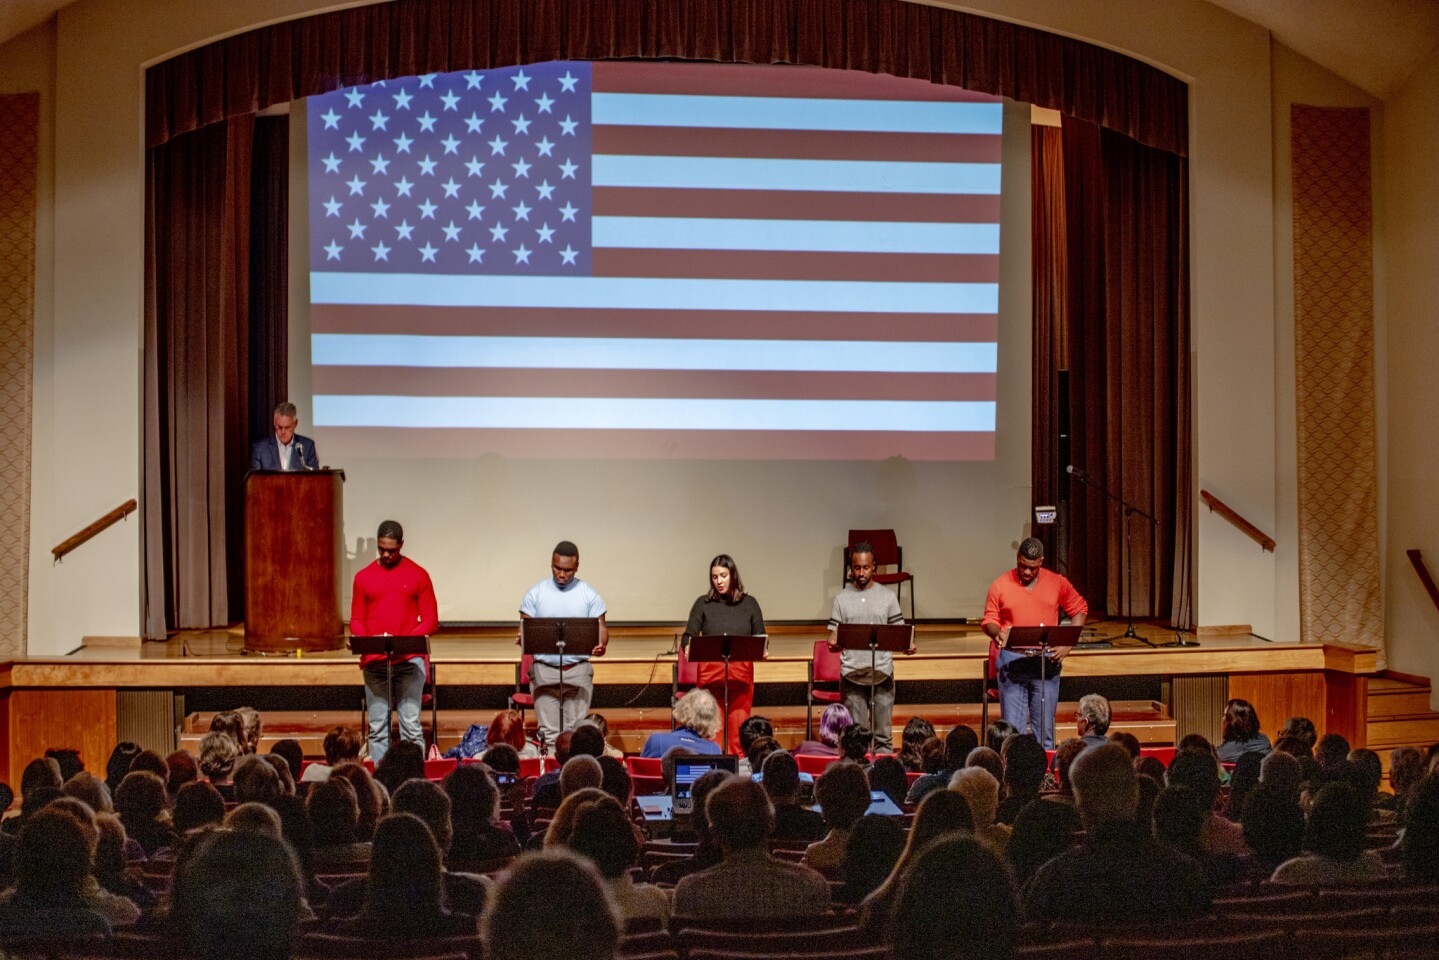 From left, Martin Kildare (at podium), Chris Mansa, Jalon Matthews, Anica Garcia-DeGraff, Malik Proctor and Fox Worth perform the stories of asylum seekers who were detained in Orange County as part of the staged reading, "Asylum Anguish: Stories from the Border." The performance concluded with a display of the American flag.